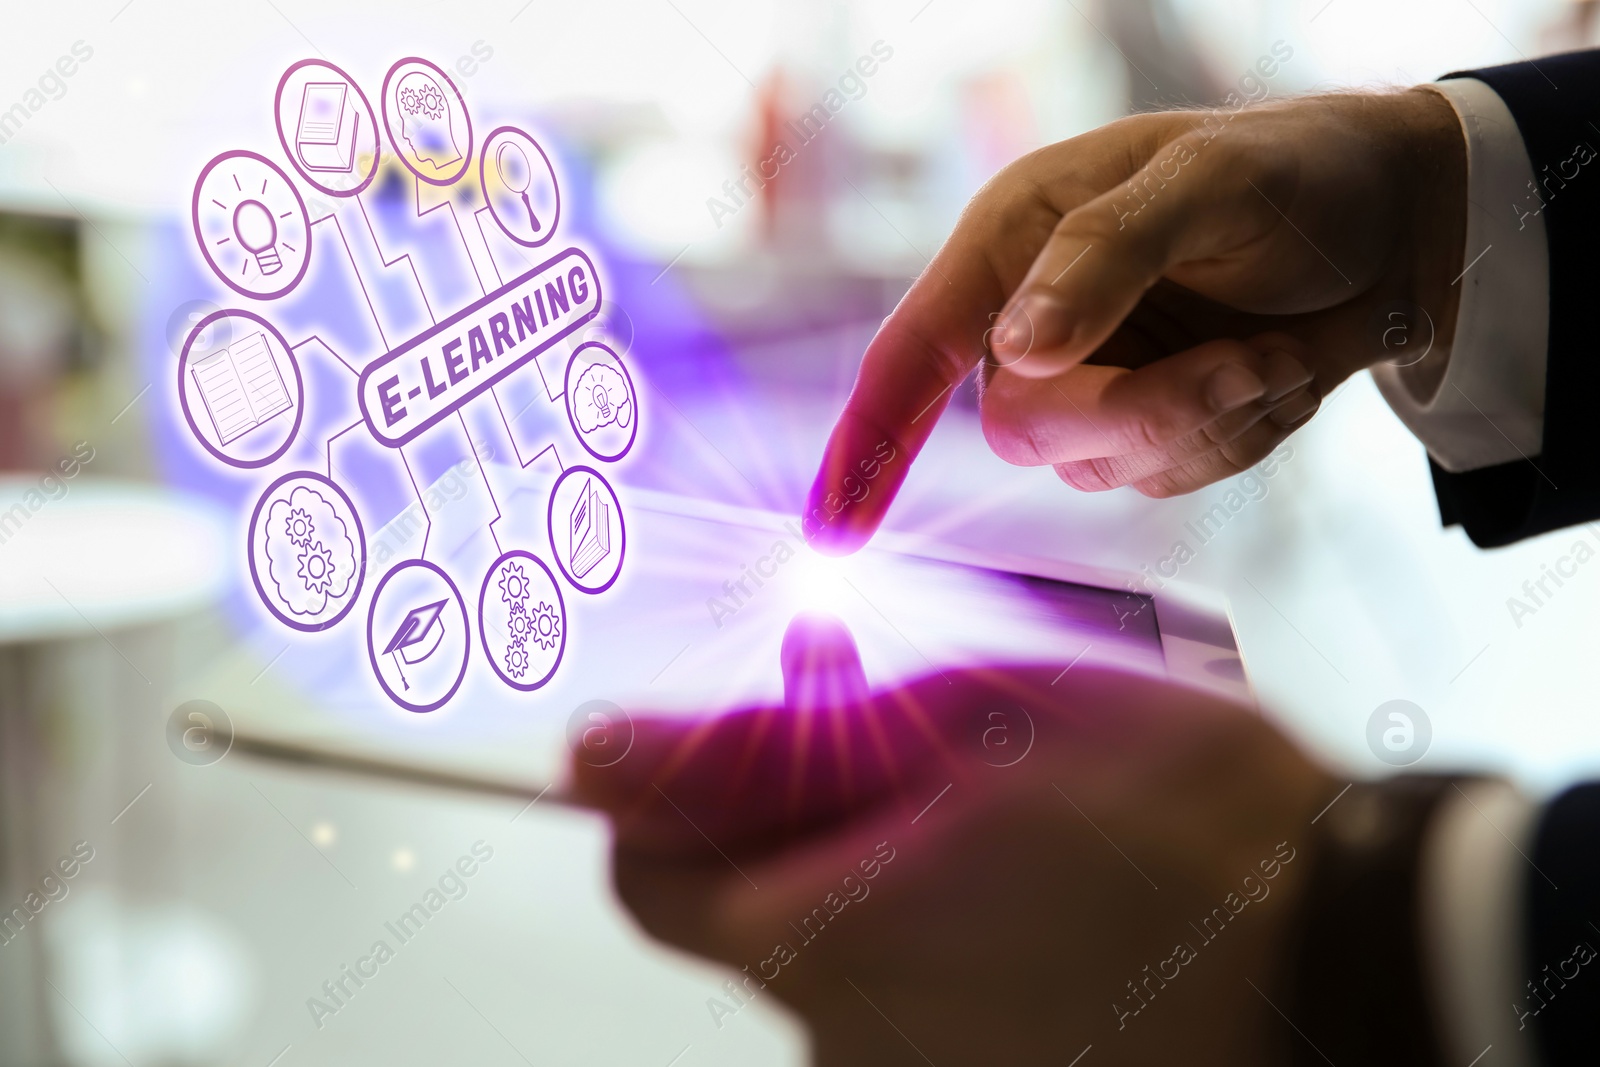 Image of E-learning. Man using tablet on blurred background, closeup. Illustration of scheme with different icons